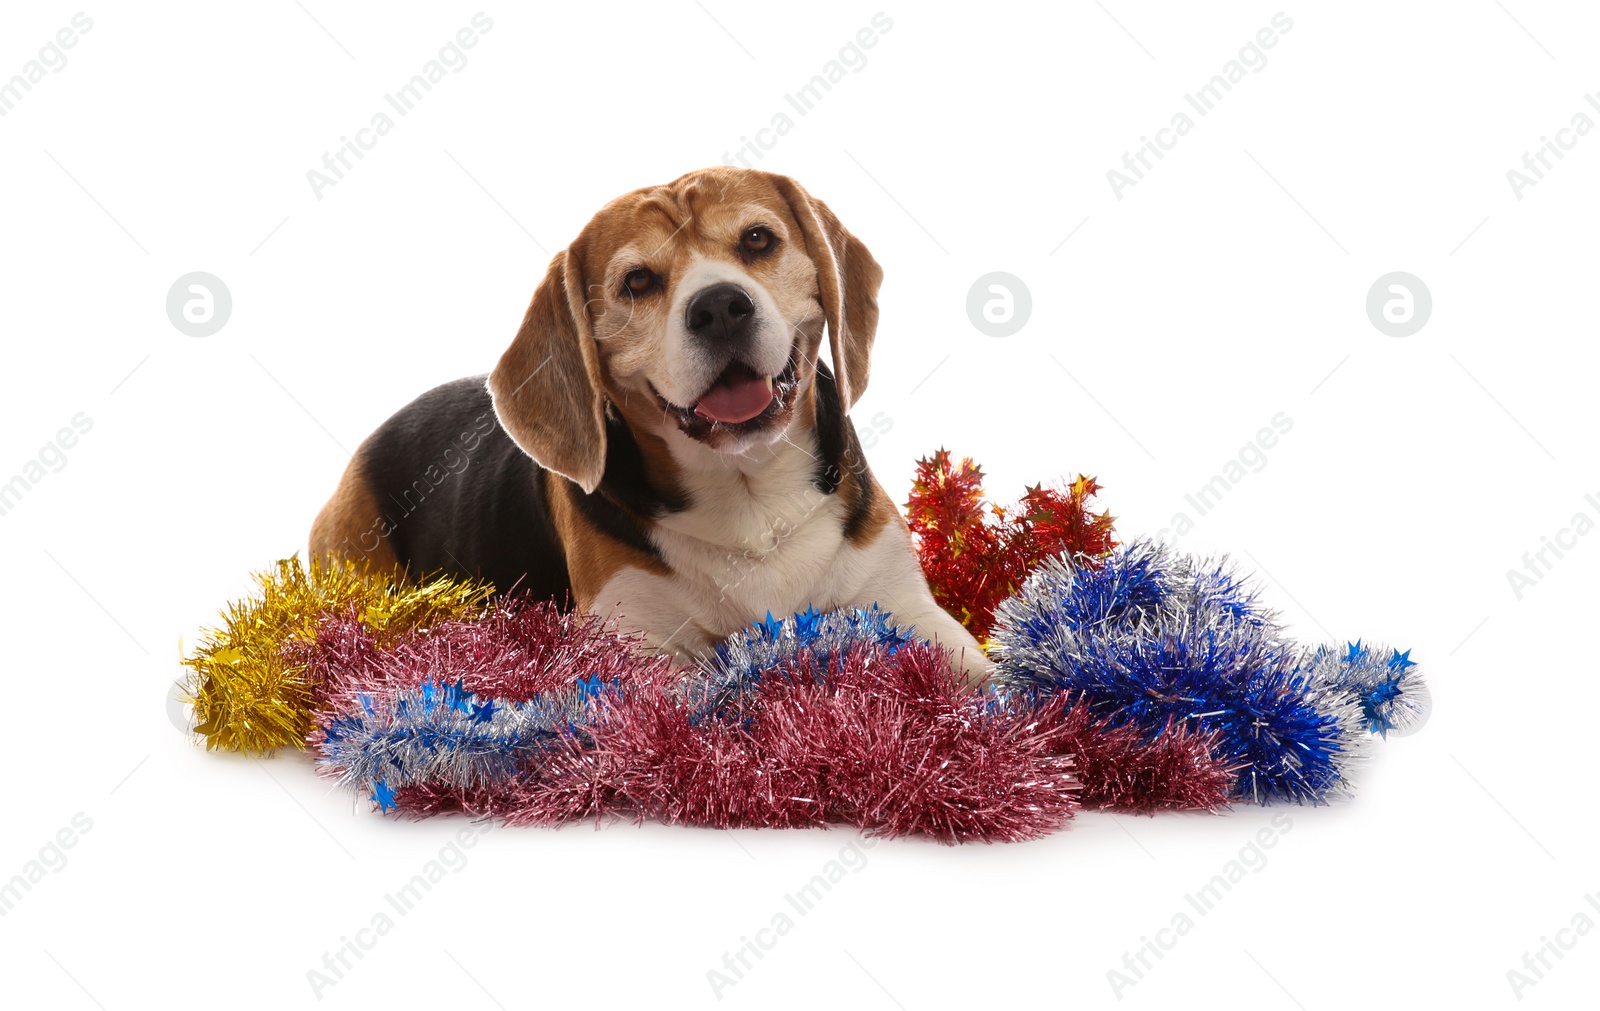 Photo of Cute Beagle dog lying on Christmas tinsels against white background